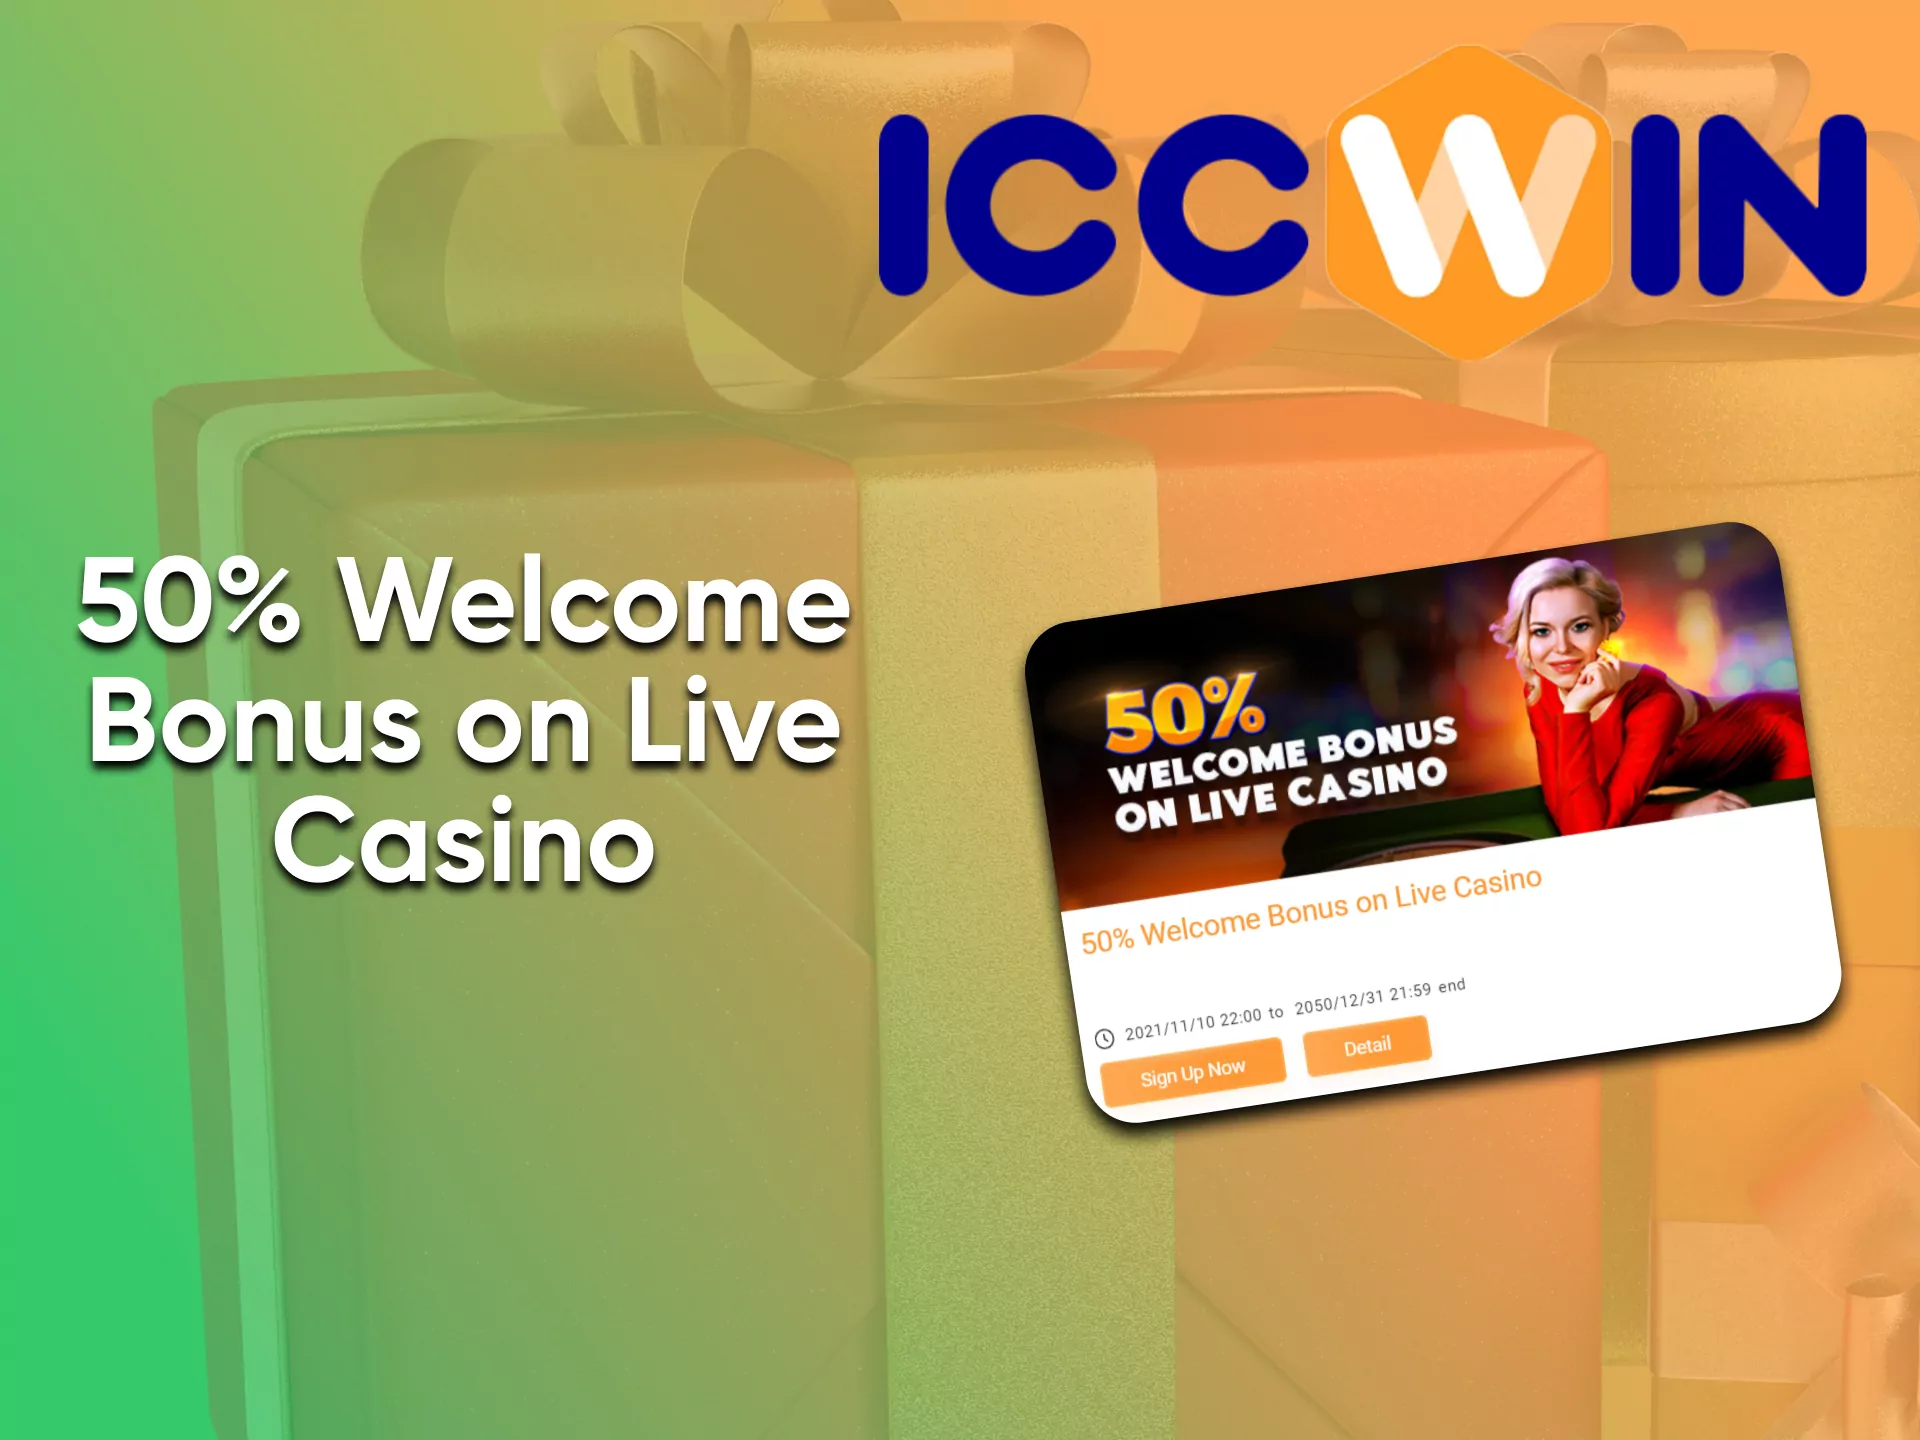 Replenish your account to receive a bonus from ICCWin.